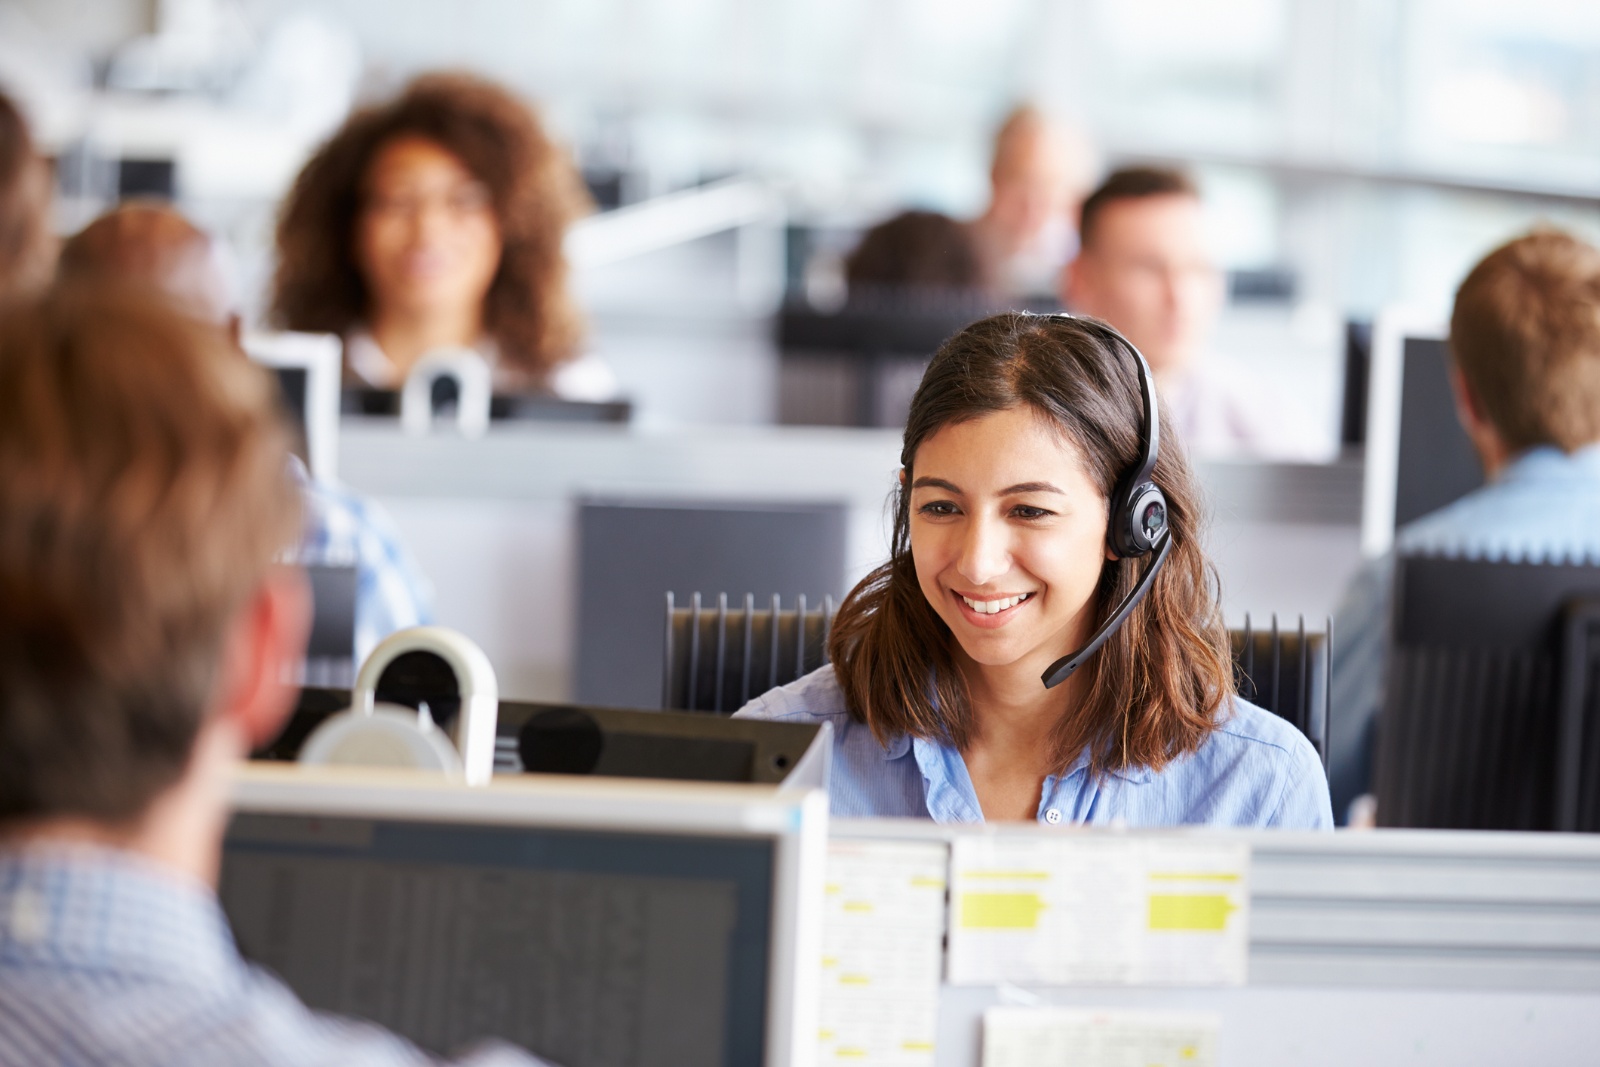 A customer service representative smiling on a call with a client